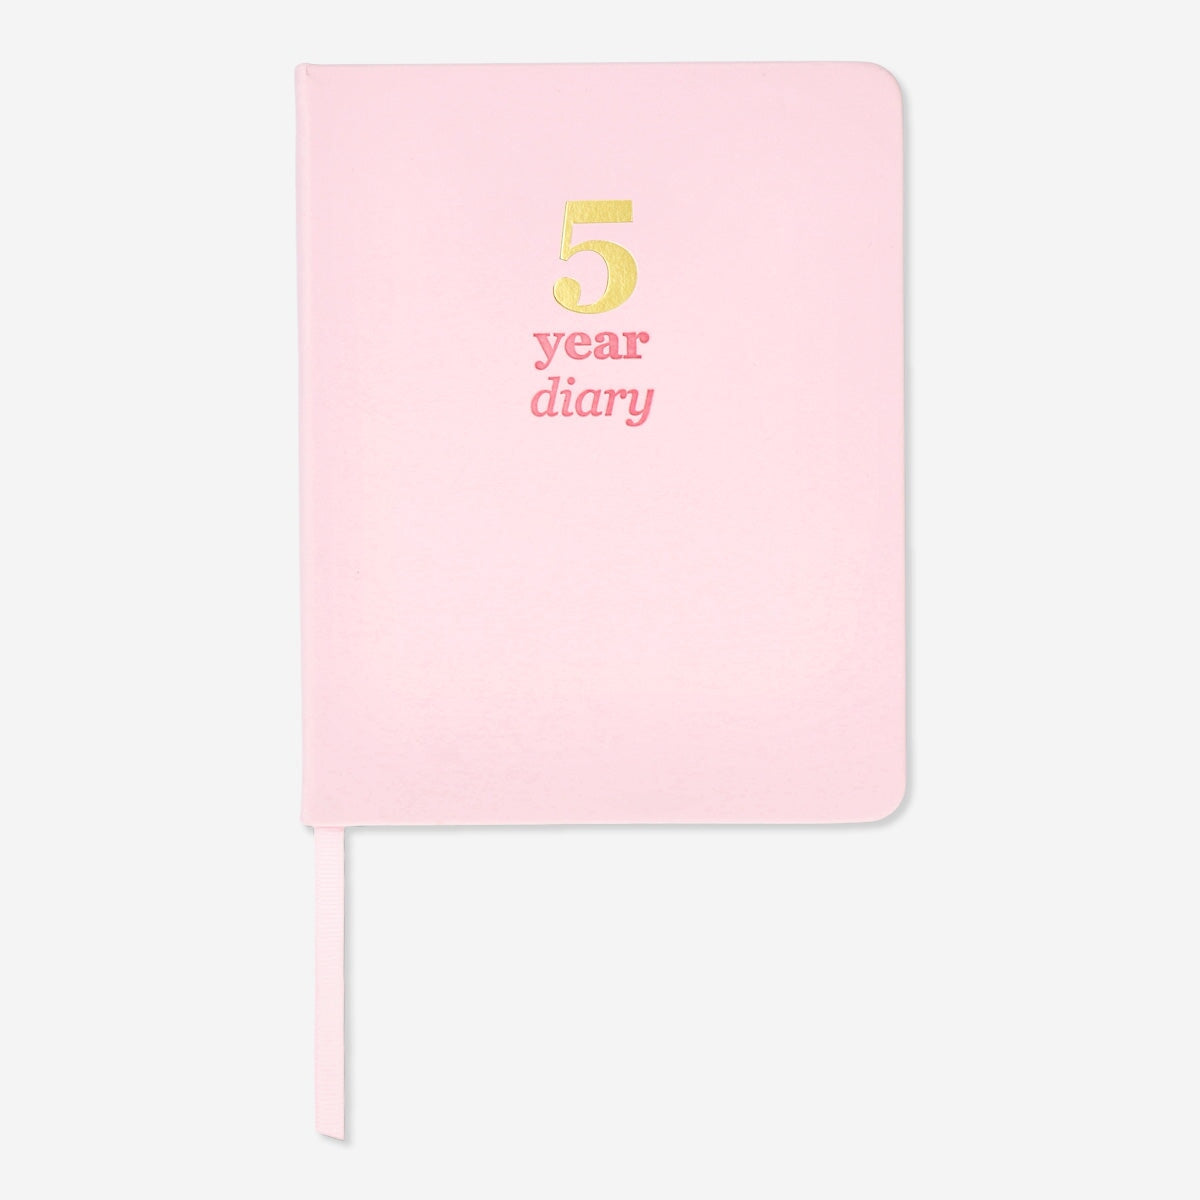 Image of Five-year diary